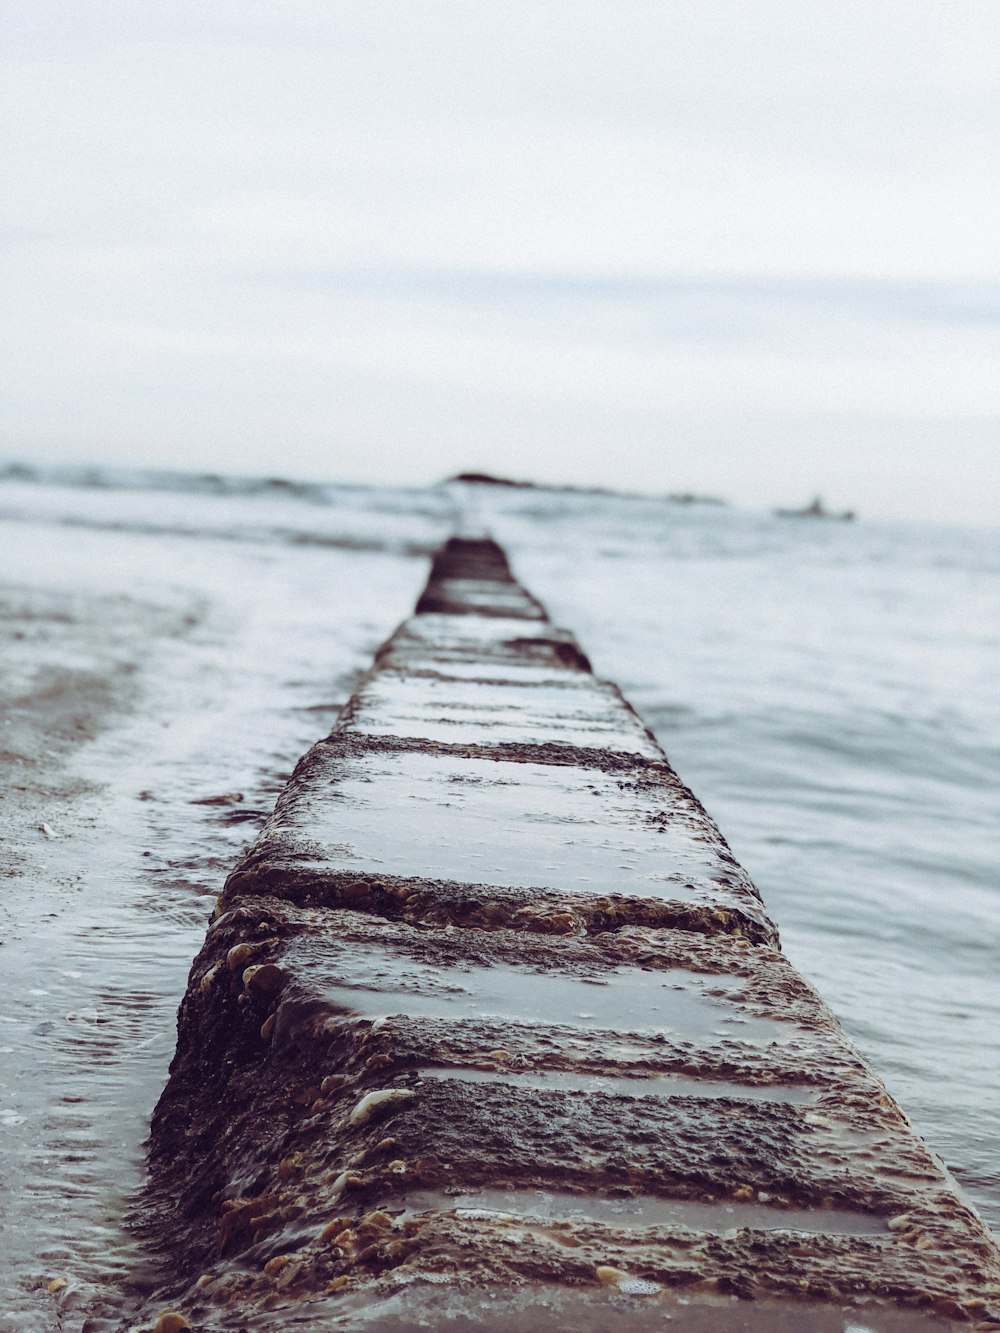 a long wooden pier sitting in the middle of a body of water